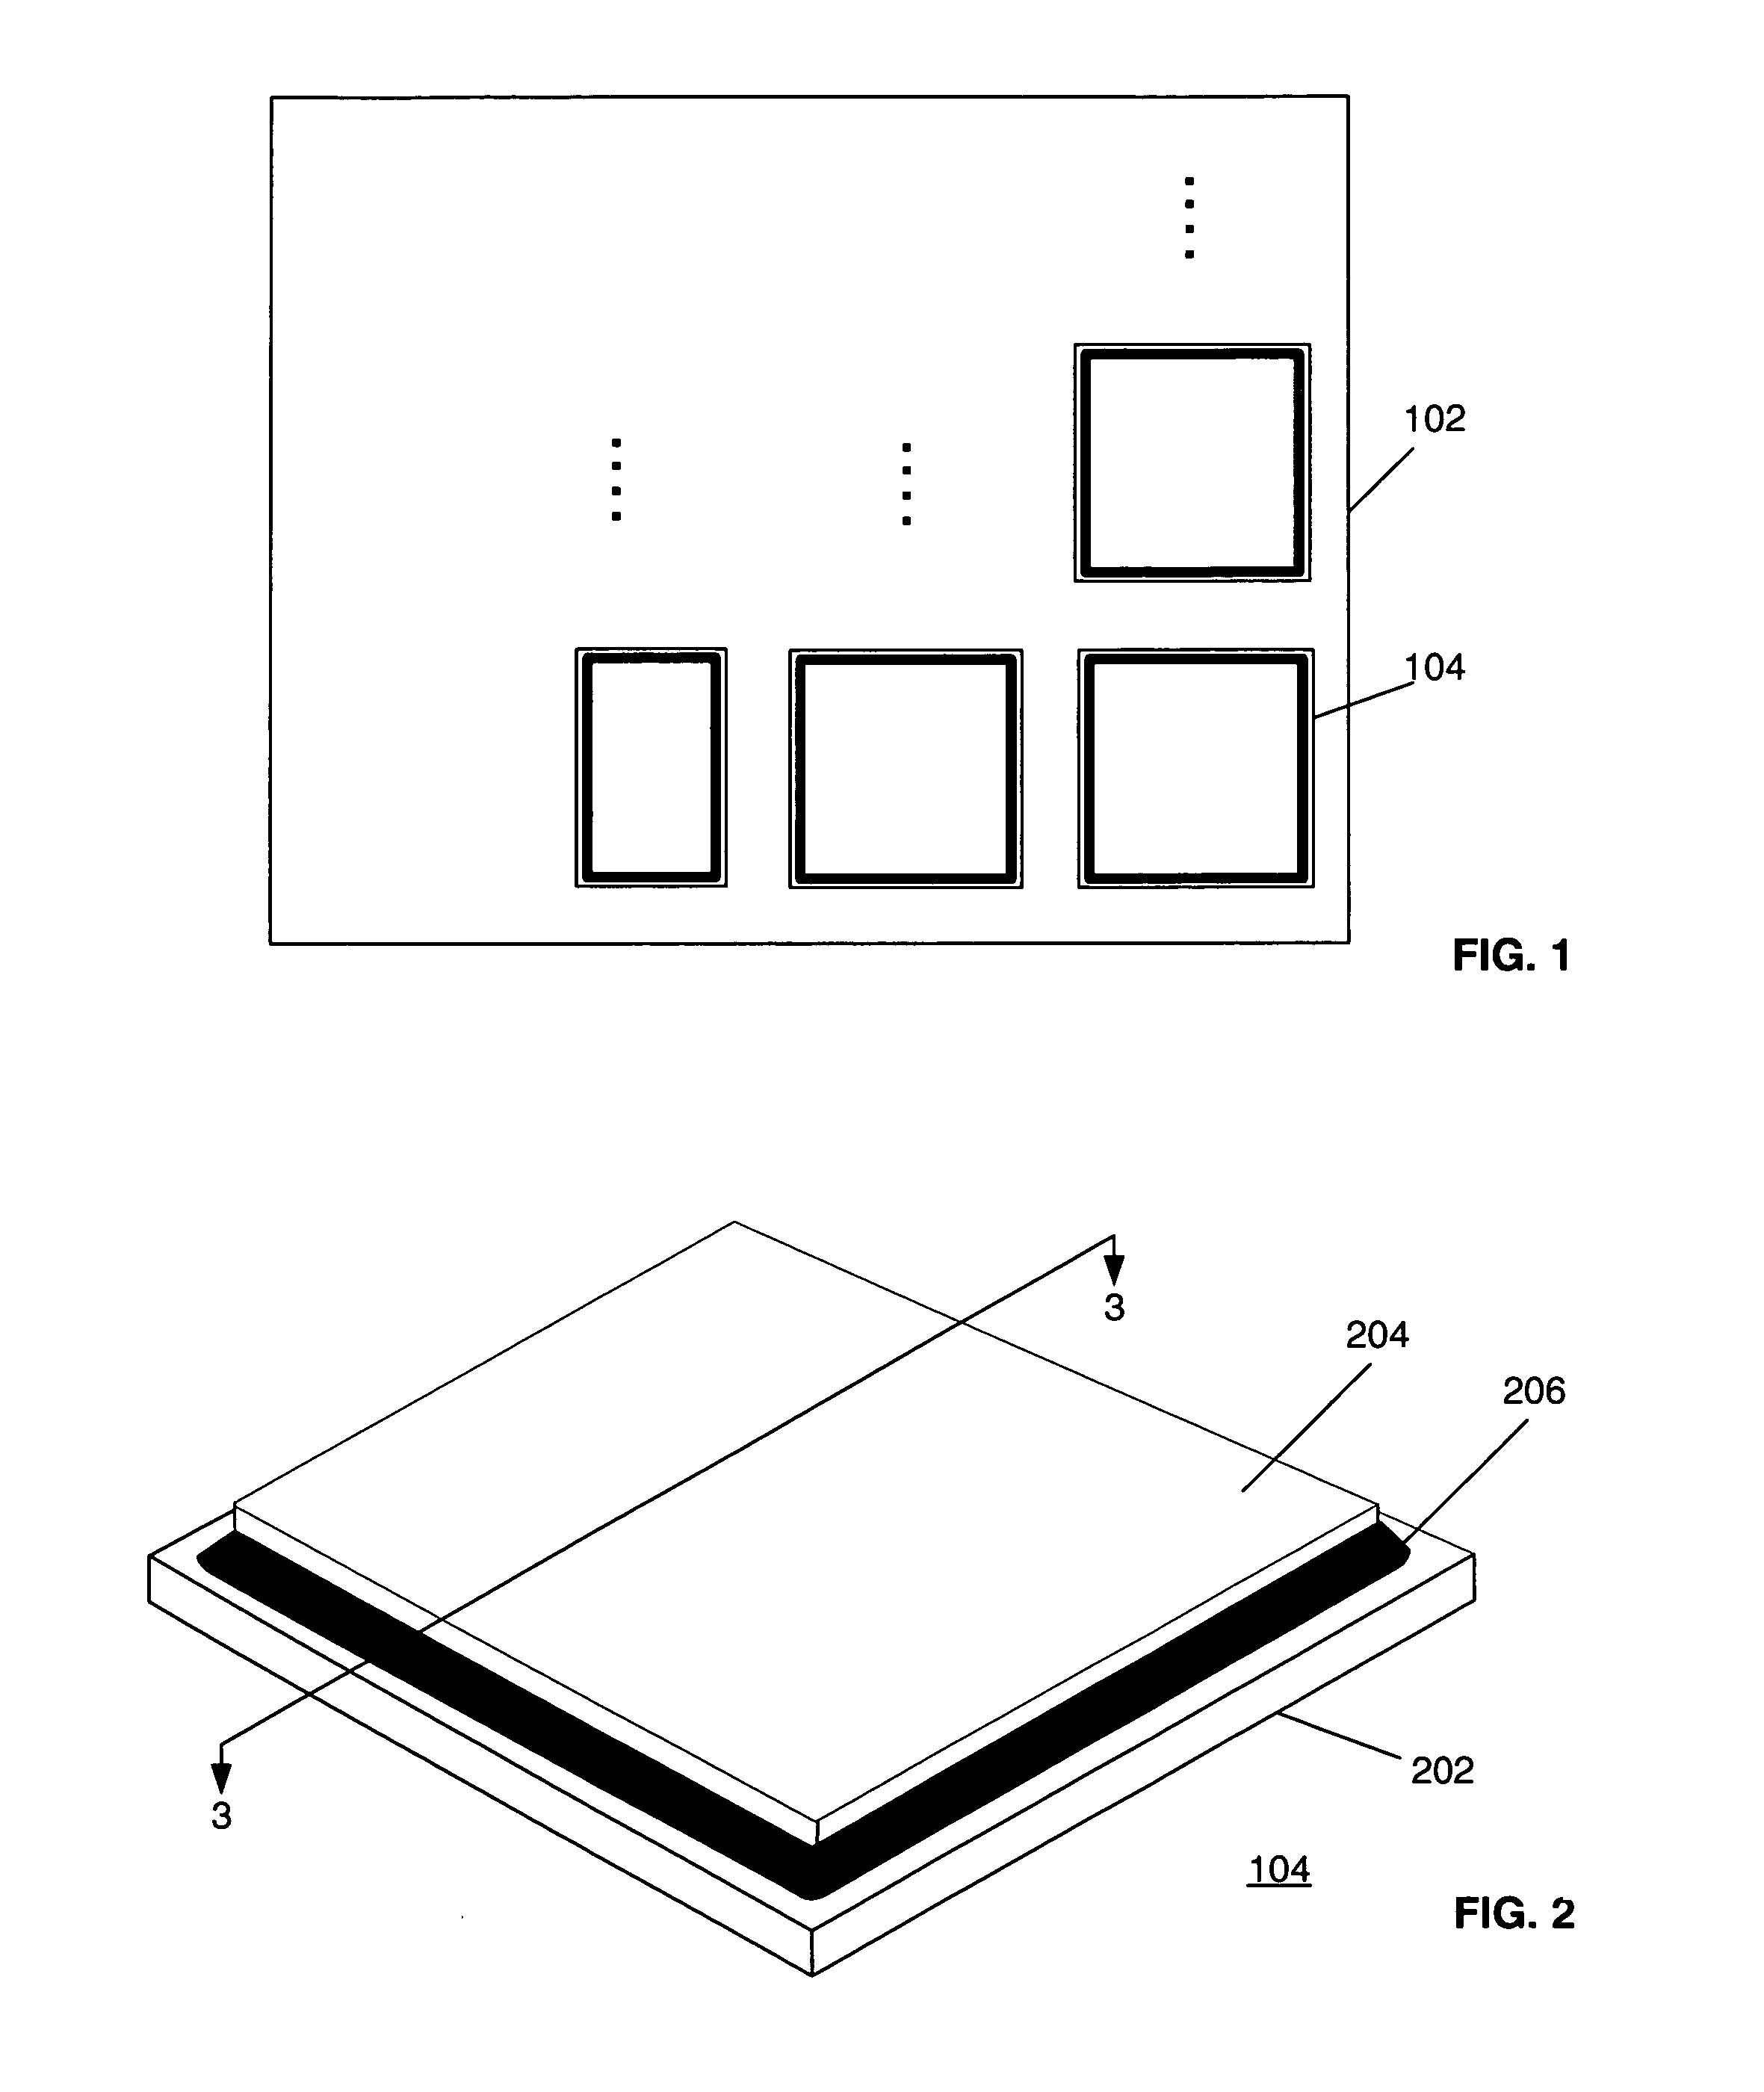 Integrated circuit having a lid and method of employing a lid on an integrated circuit